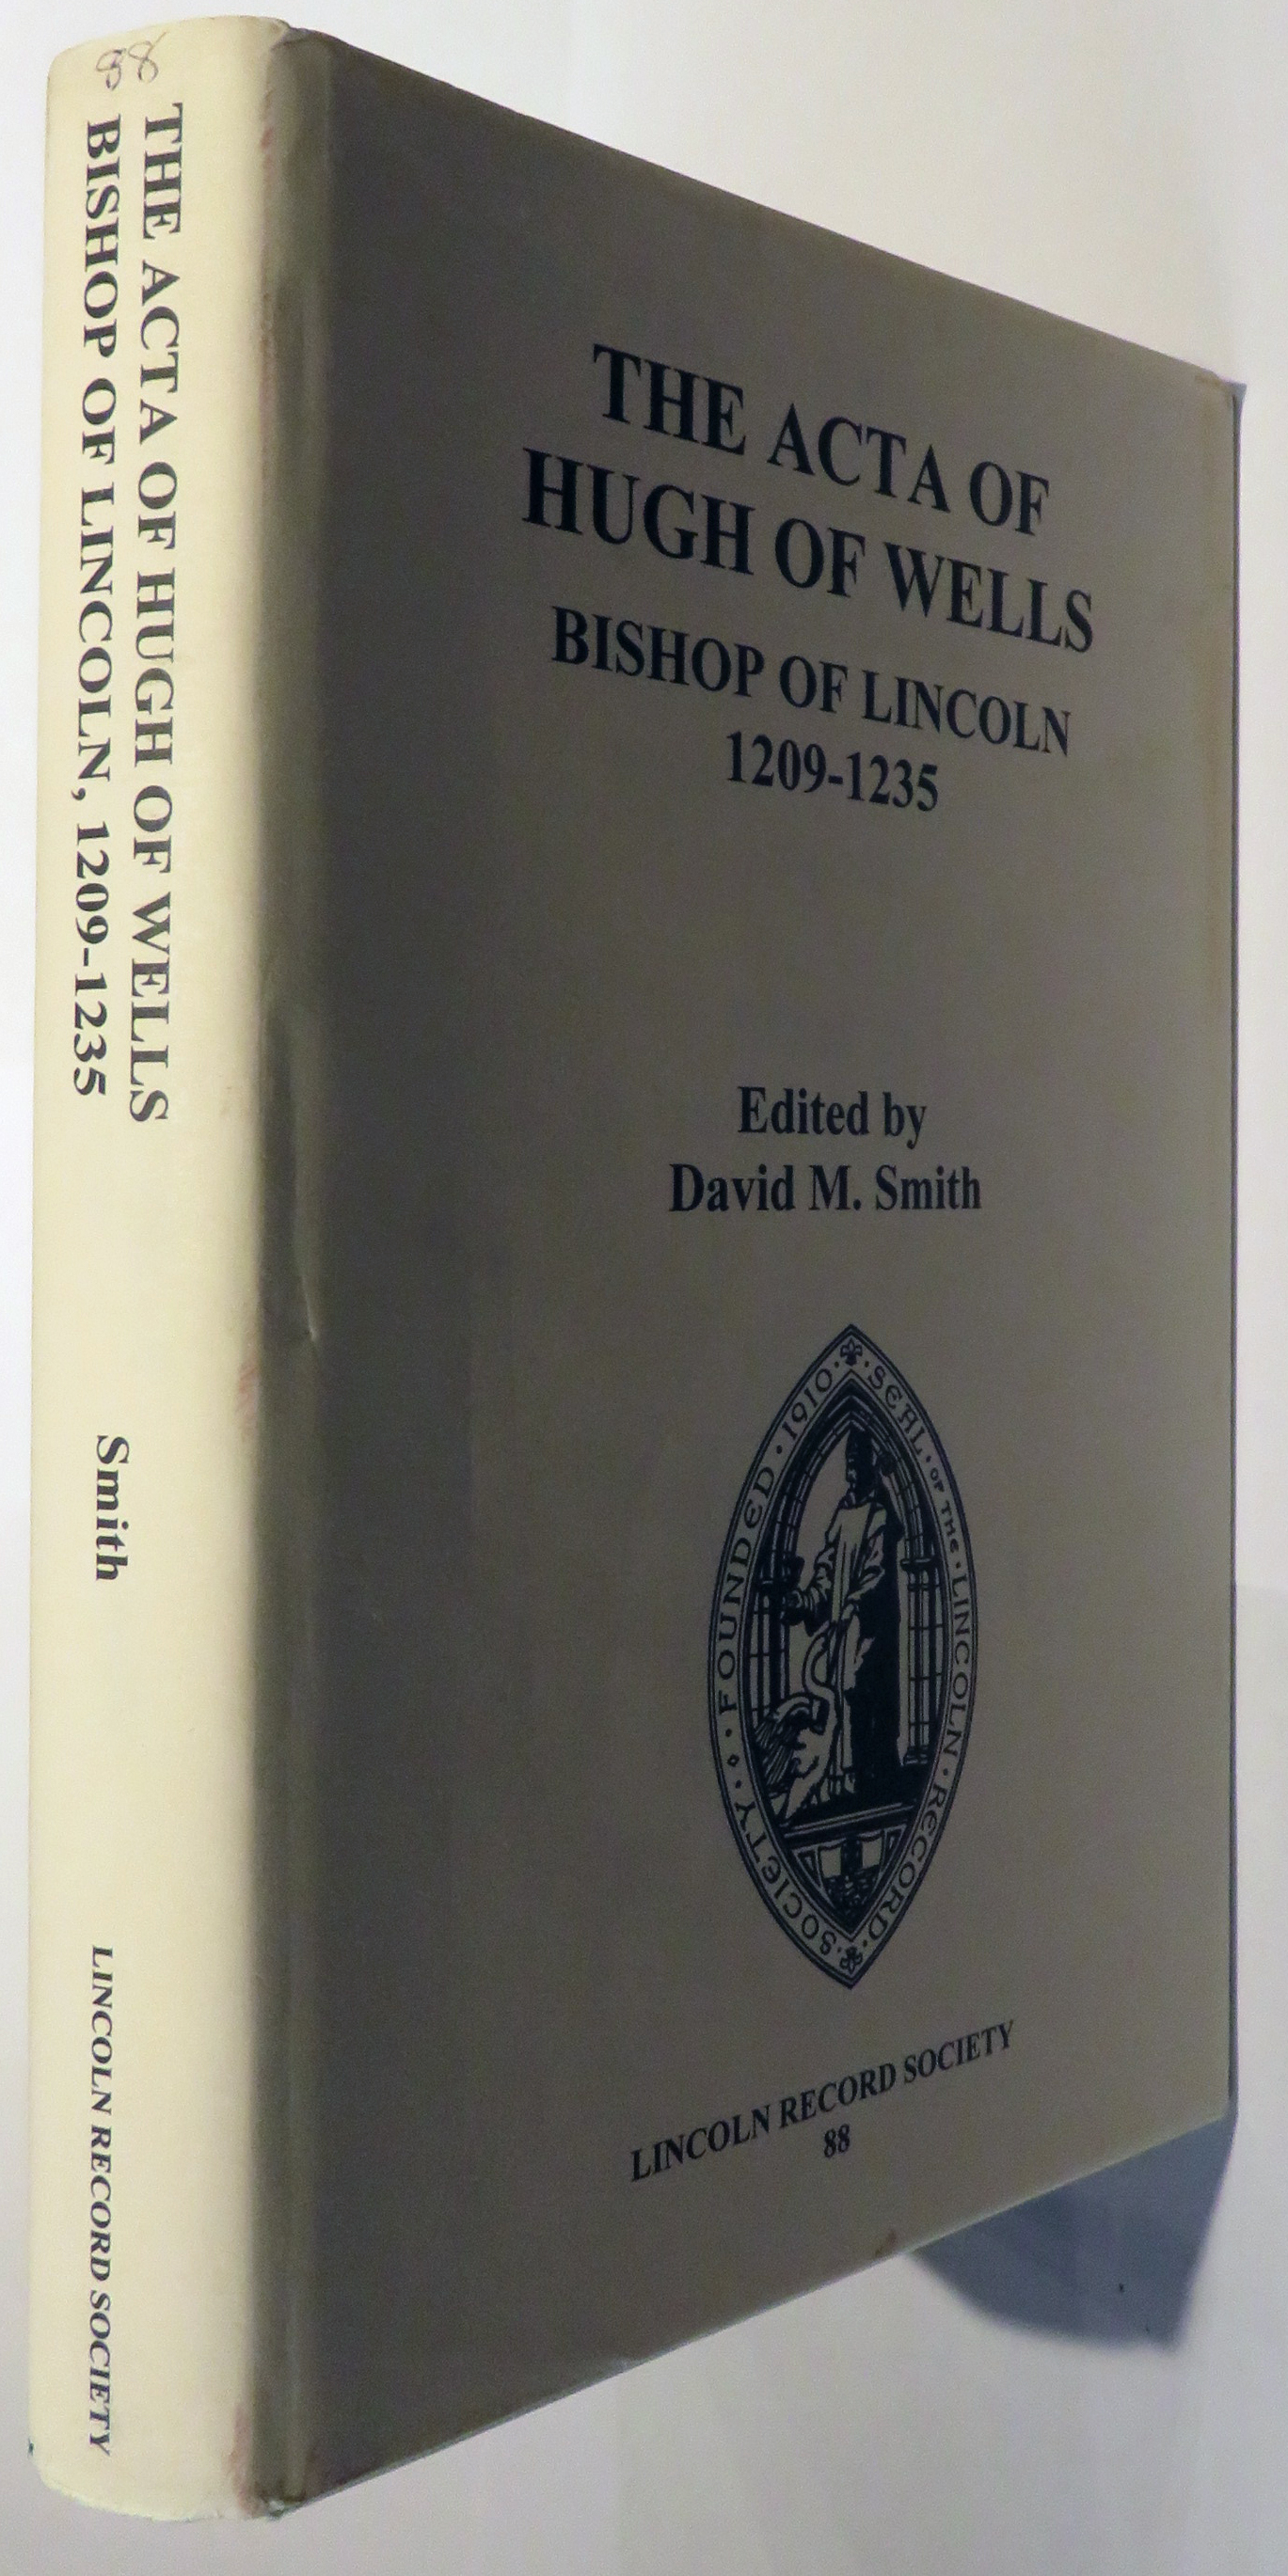 The Acta Of Hugh Of Wells Bishop Of Lincoln 1209-1235 The Publications Of The Lincoln Record Society Volume 88